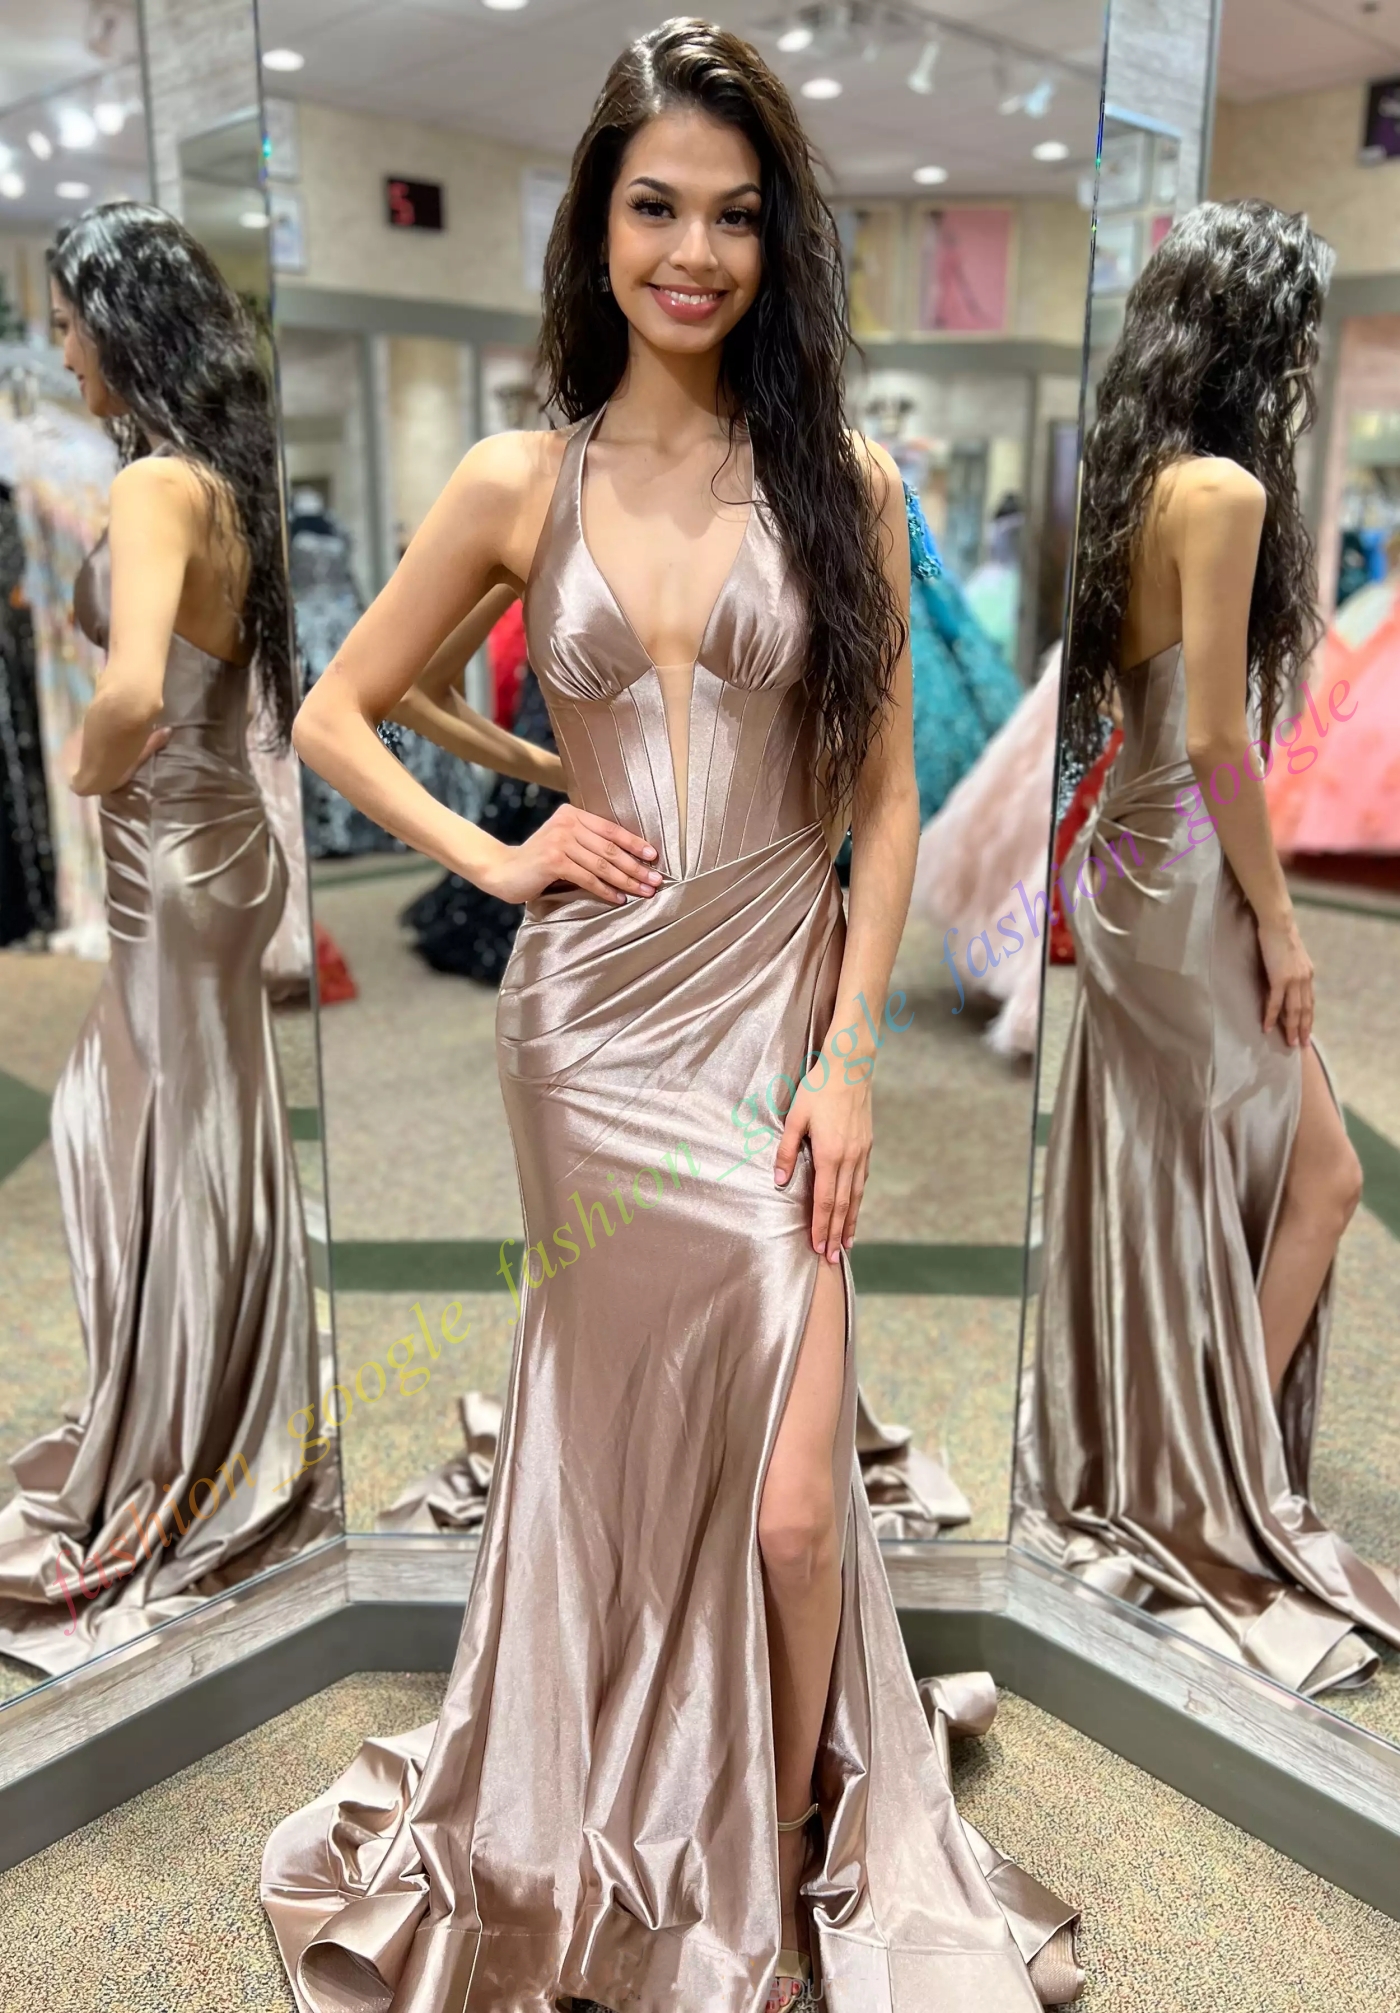 Stretch Satin Formal Party Dress 2K24 Halter V-ringad Lady Pageant Prom Evening Event Special Tillfälle Hoco Gala Cocktail Red Carpet Runway Gown Photoshoot Slit Gold